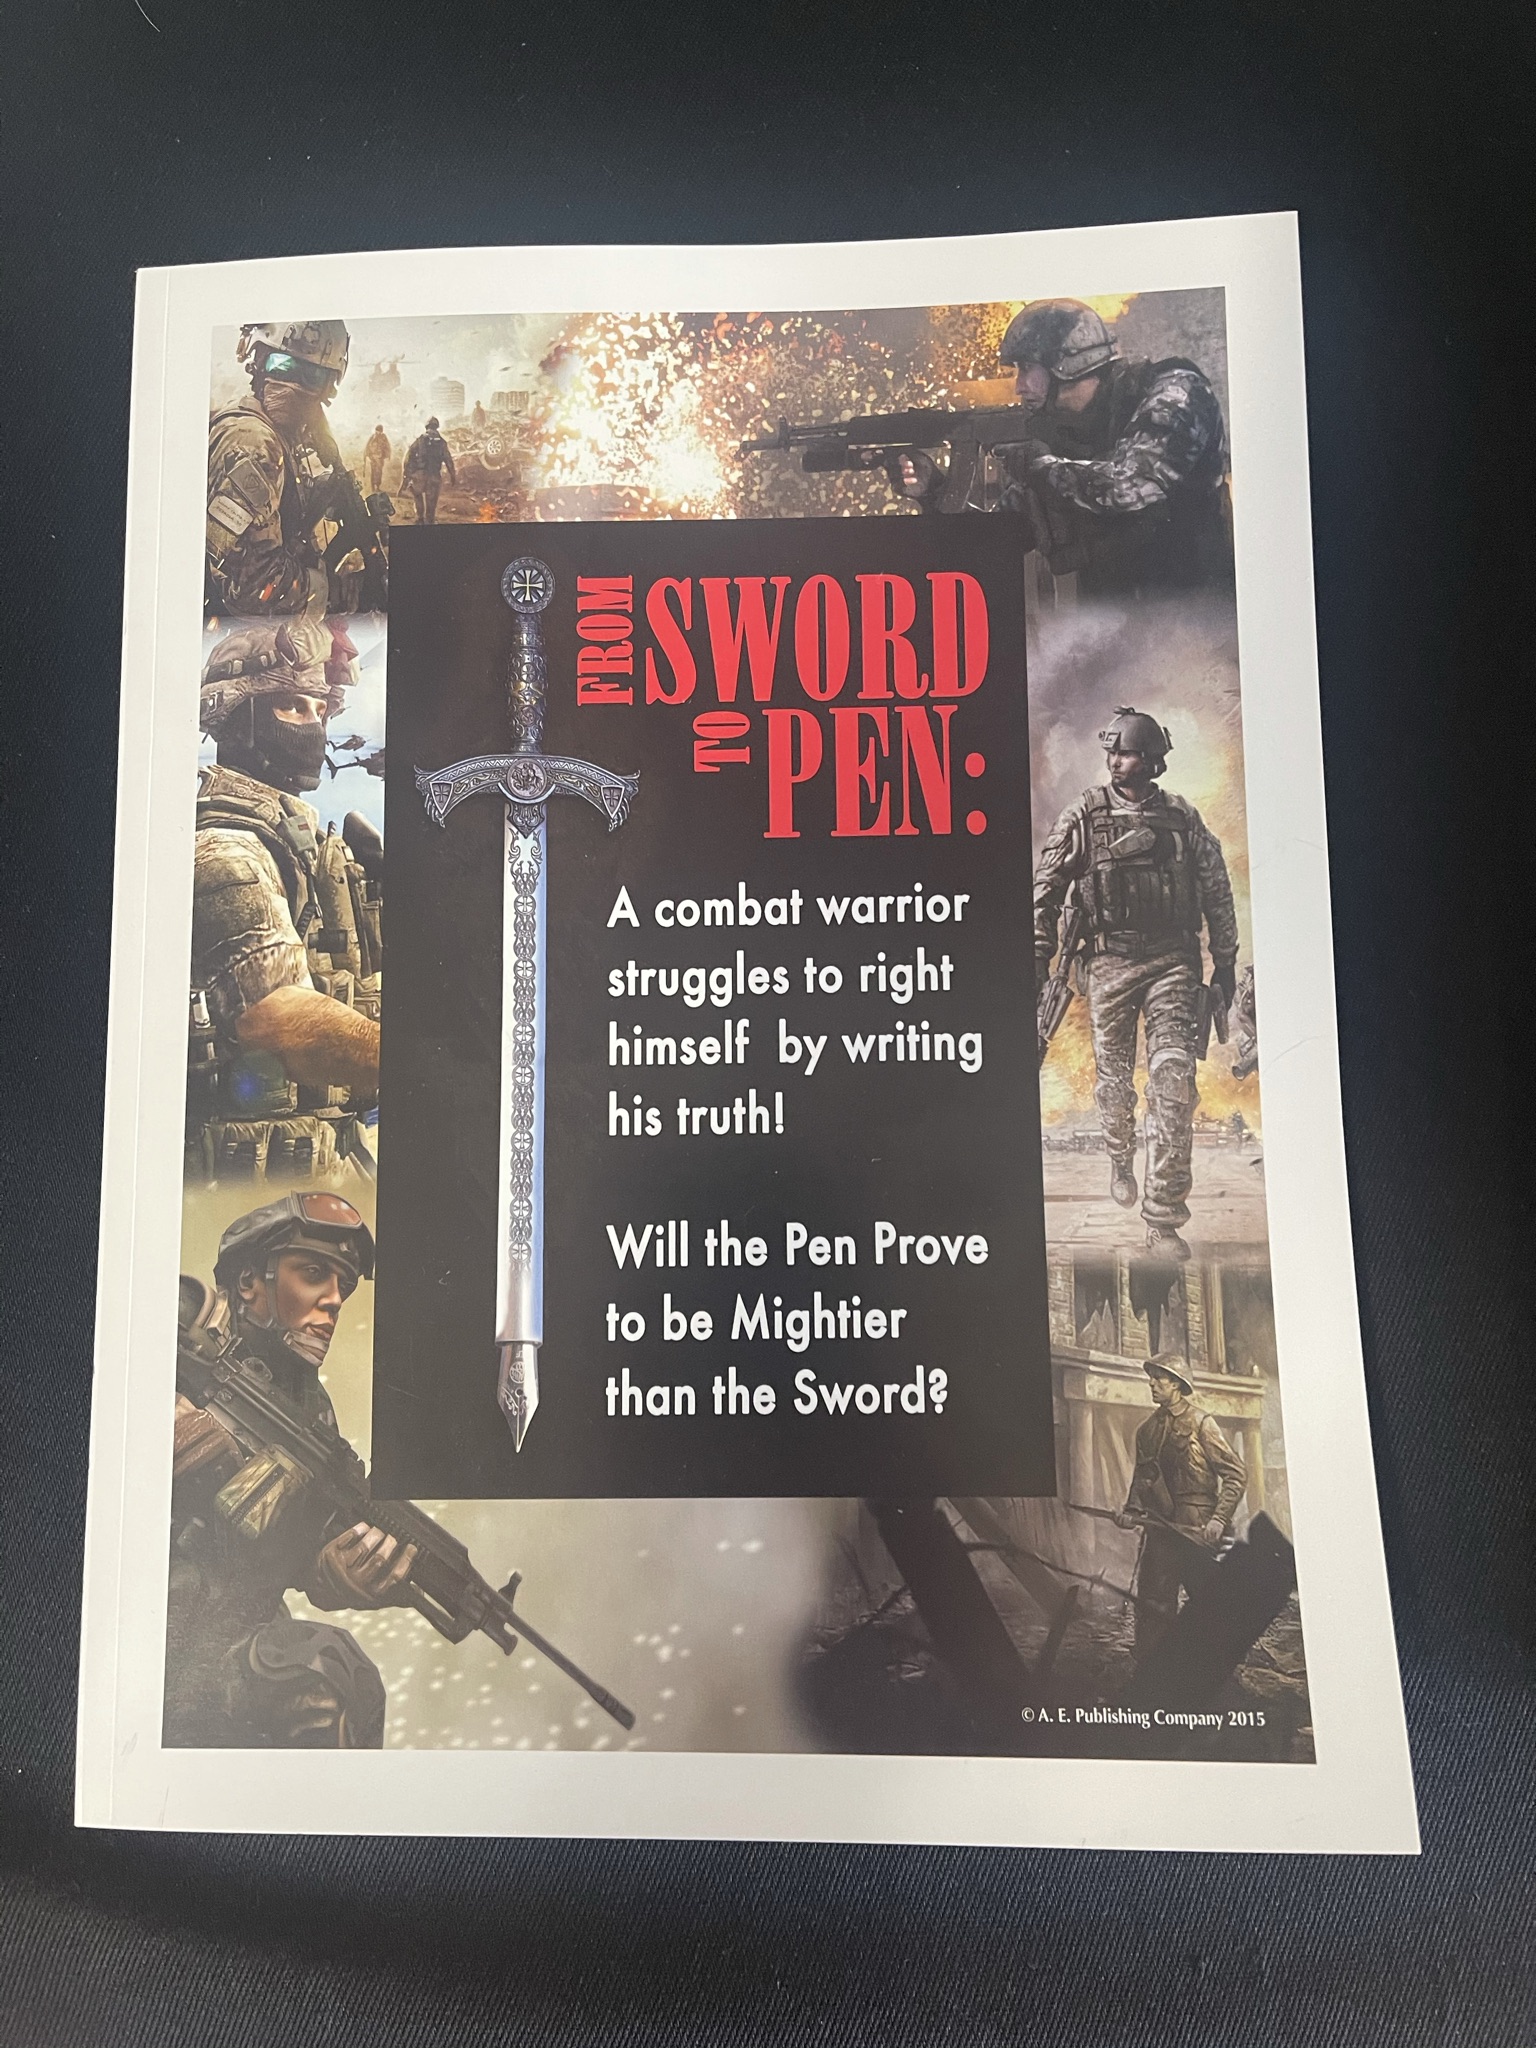 Featured image for “From Sword To Pen”